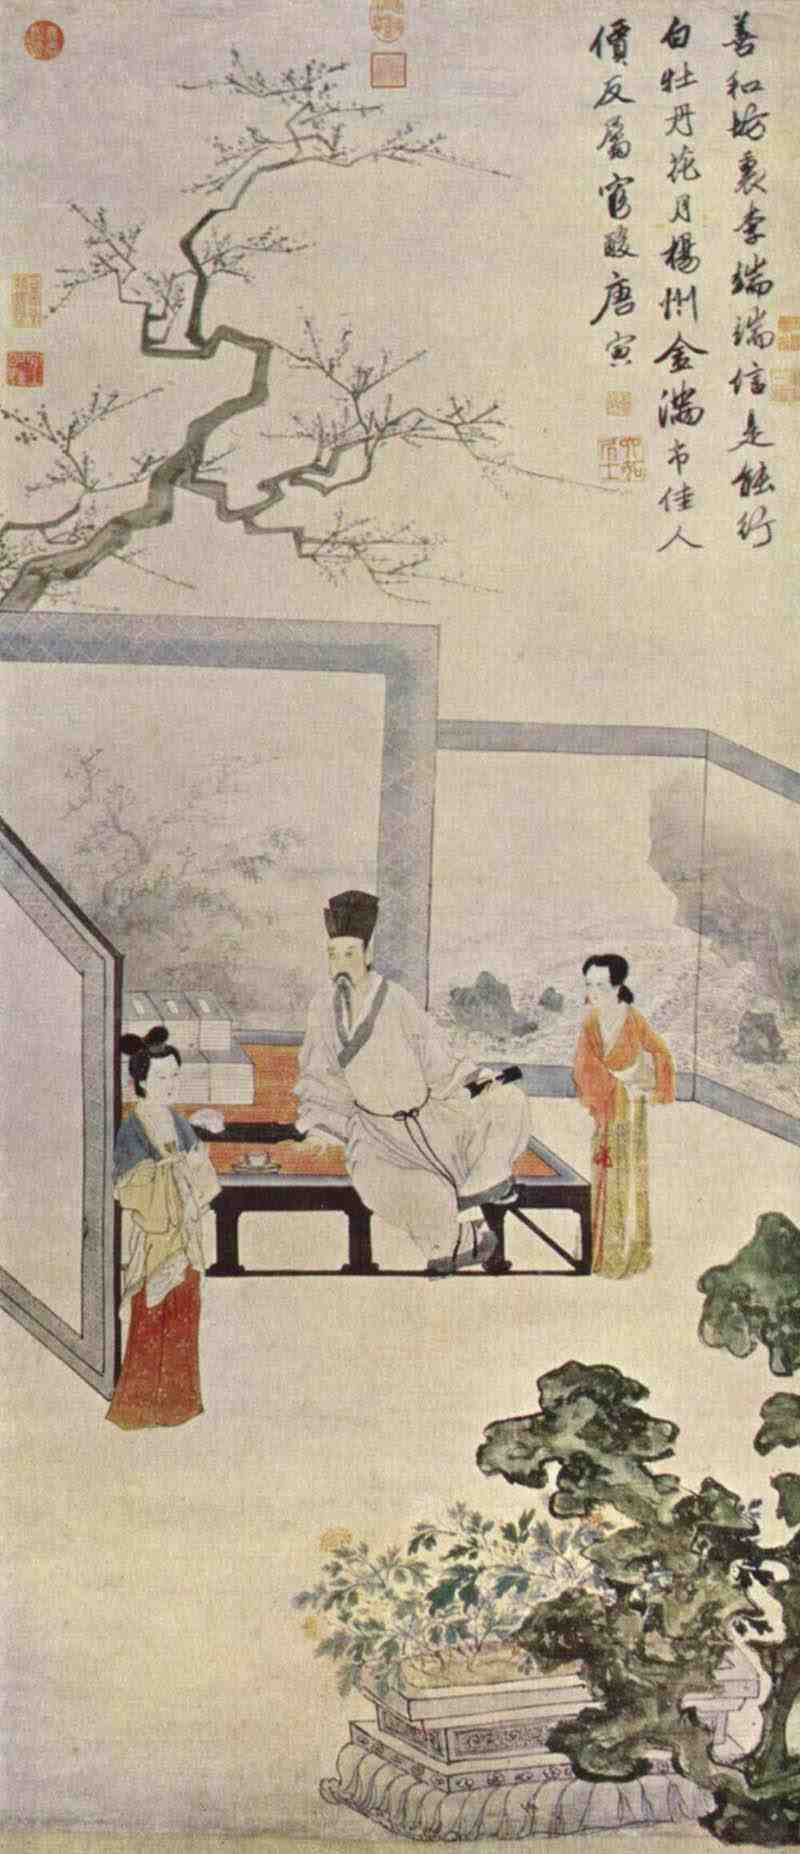 The poet and two courtesans, T'ang Yin